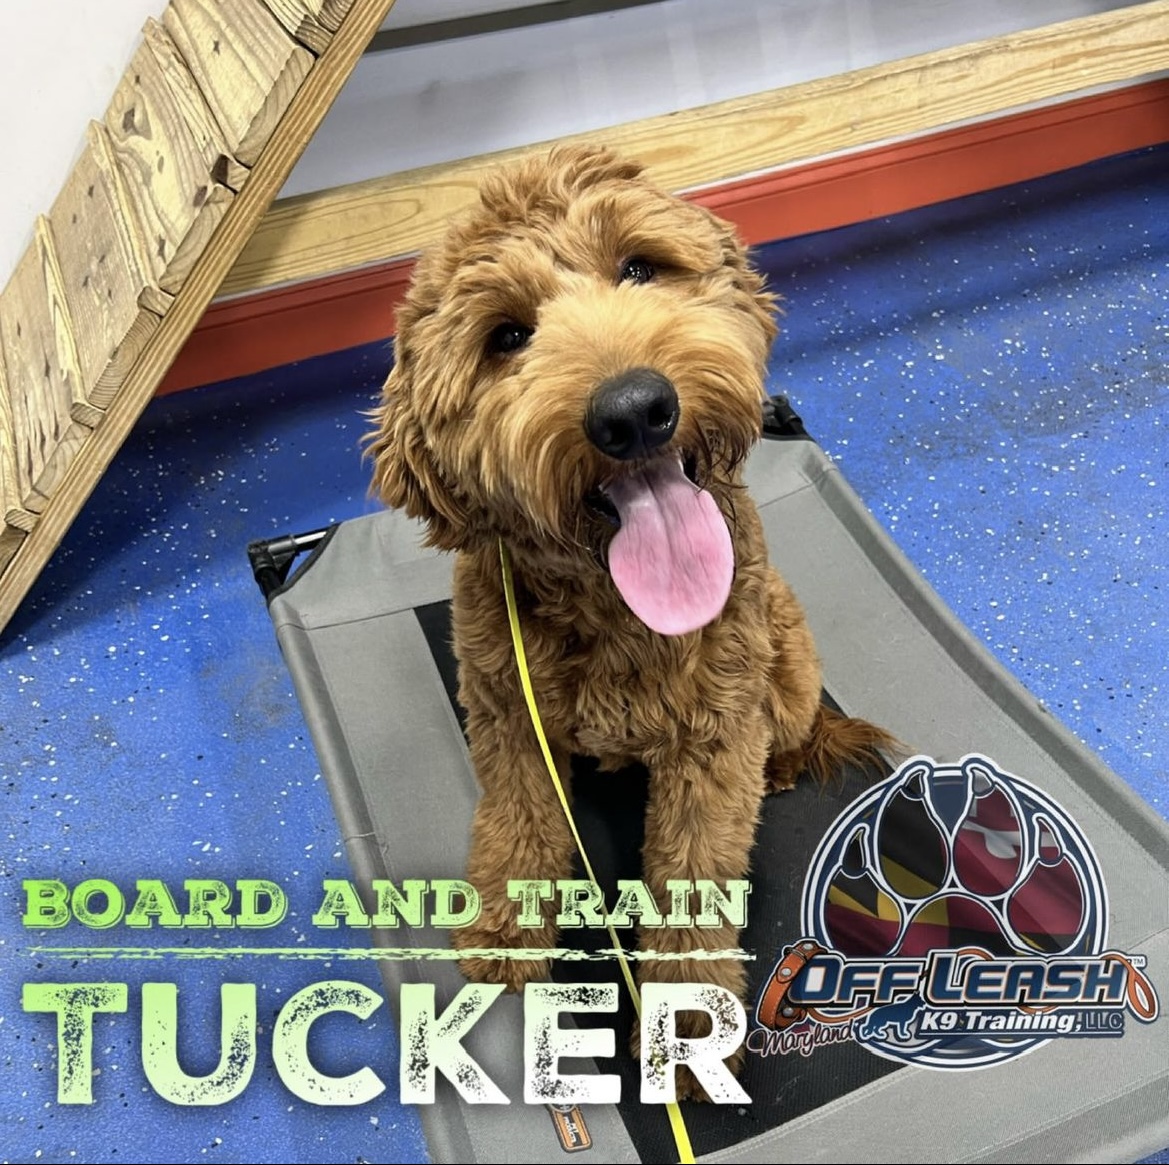 Dog named Tucker who completed the board and train program